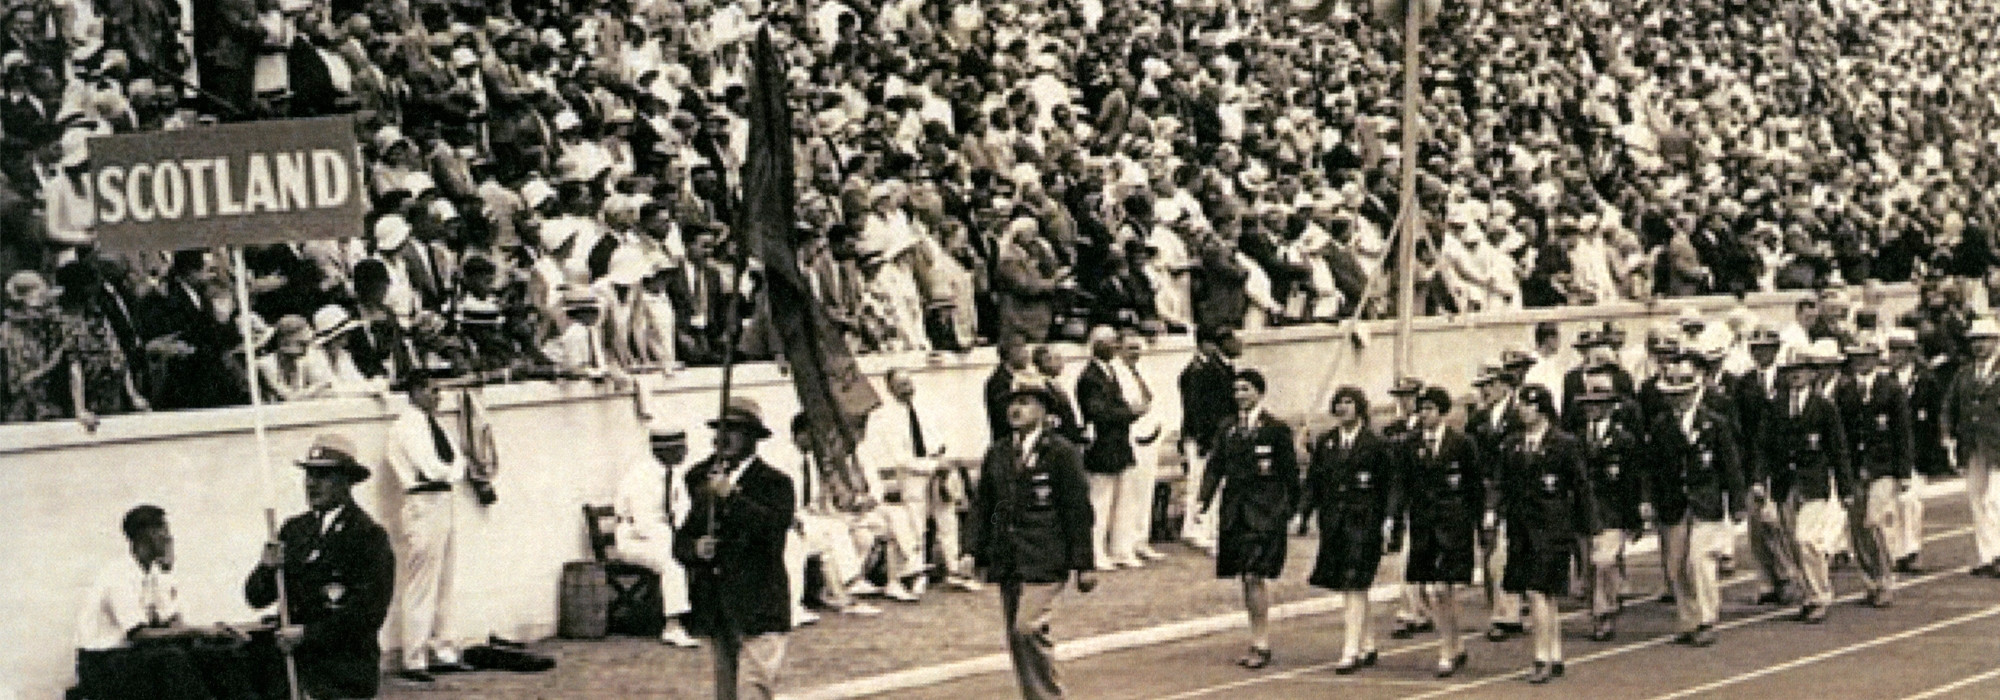 There was a capacity crowd at the Civic Stadium for the Opening Ceremony of the 1930 British Empire Games in Hamilton ©Commonwealth Games Scotland